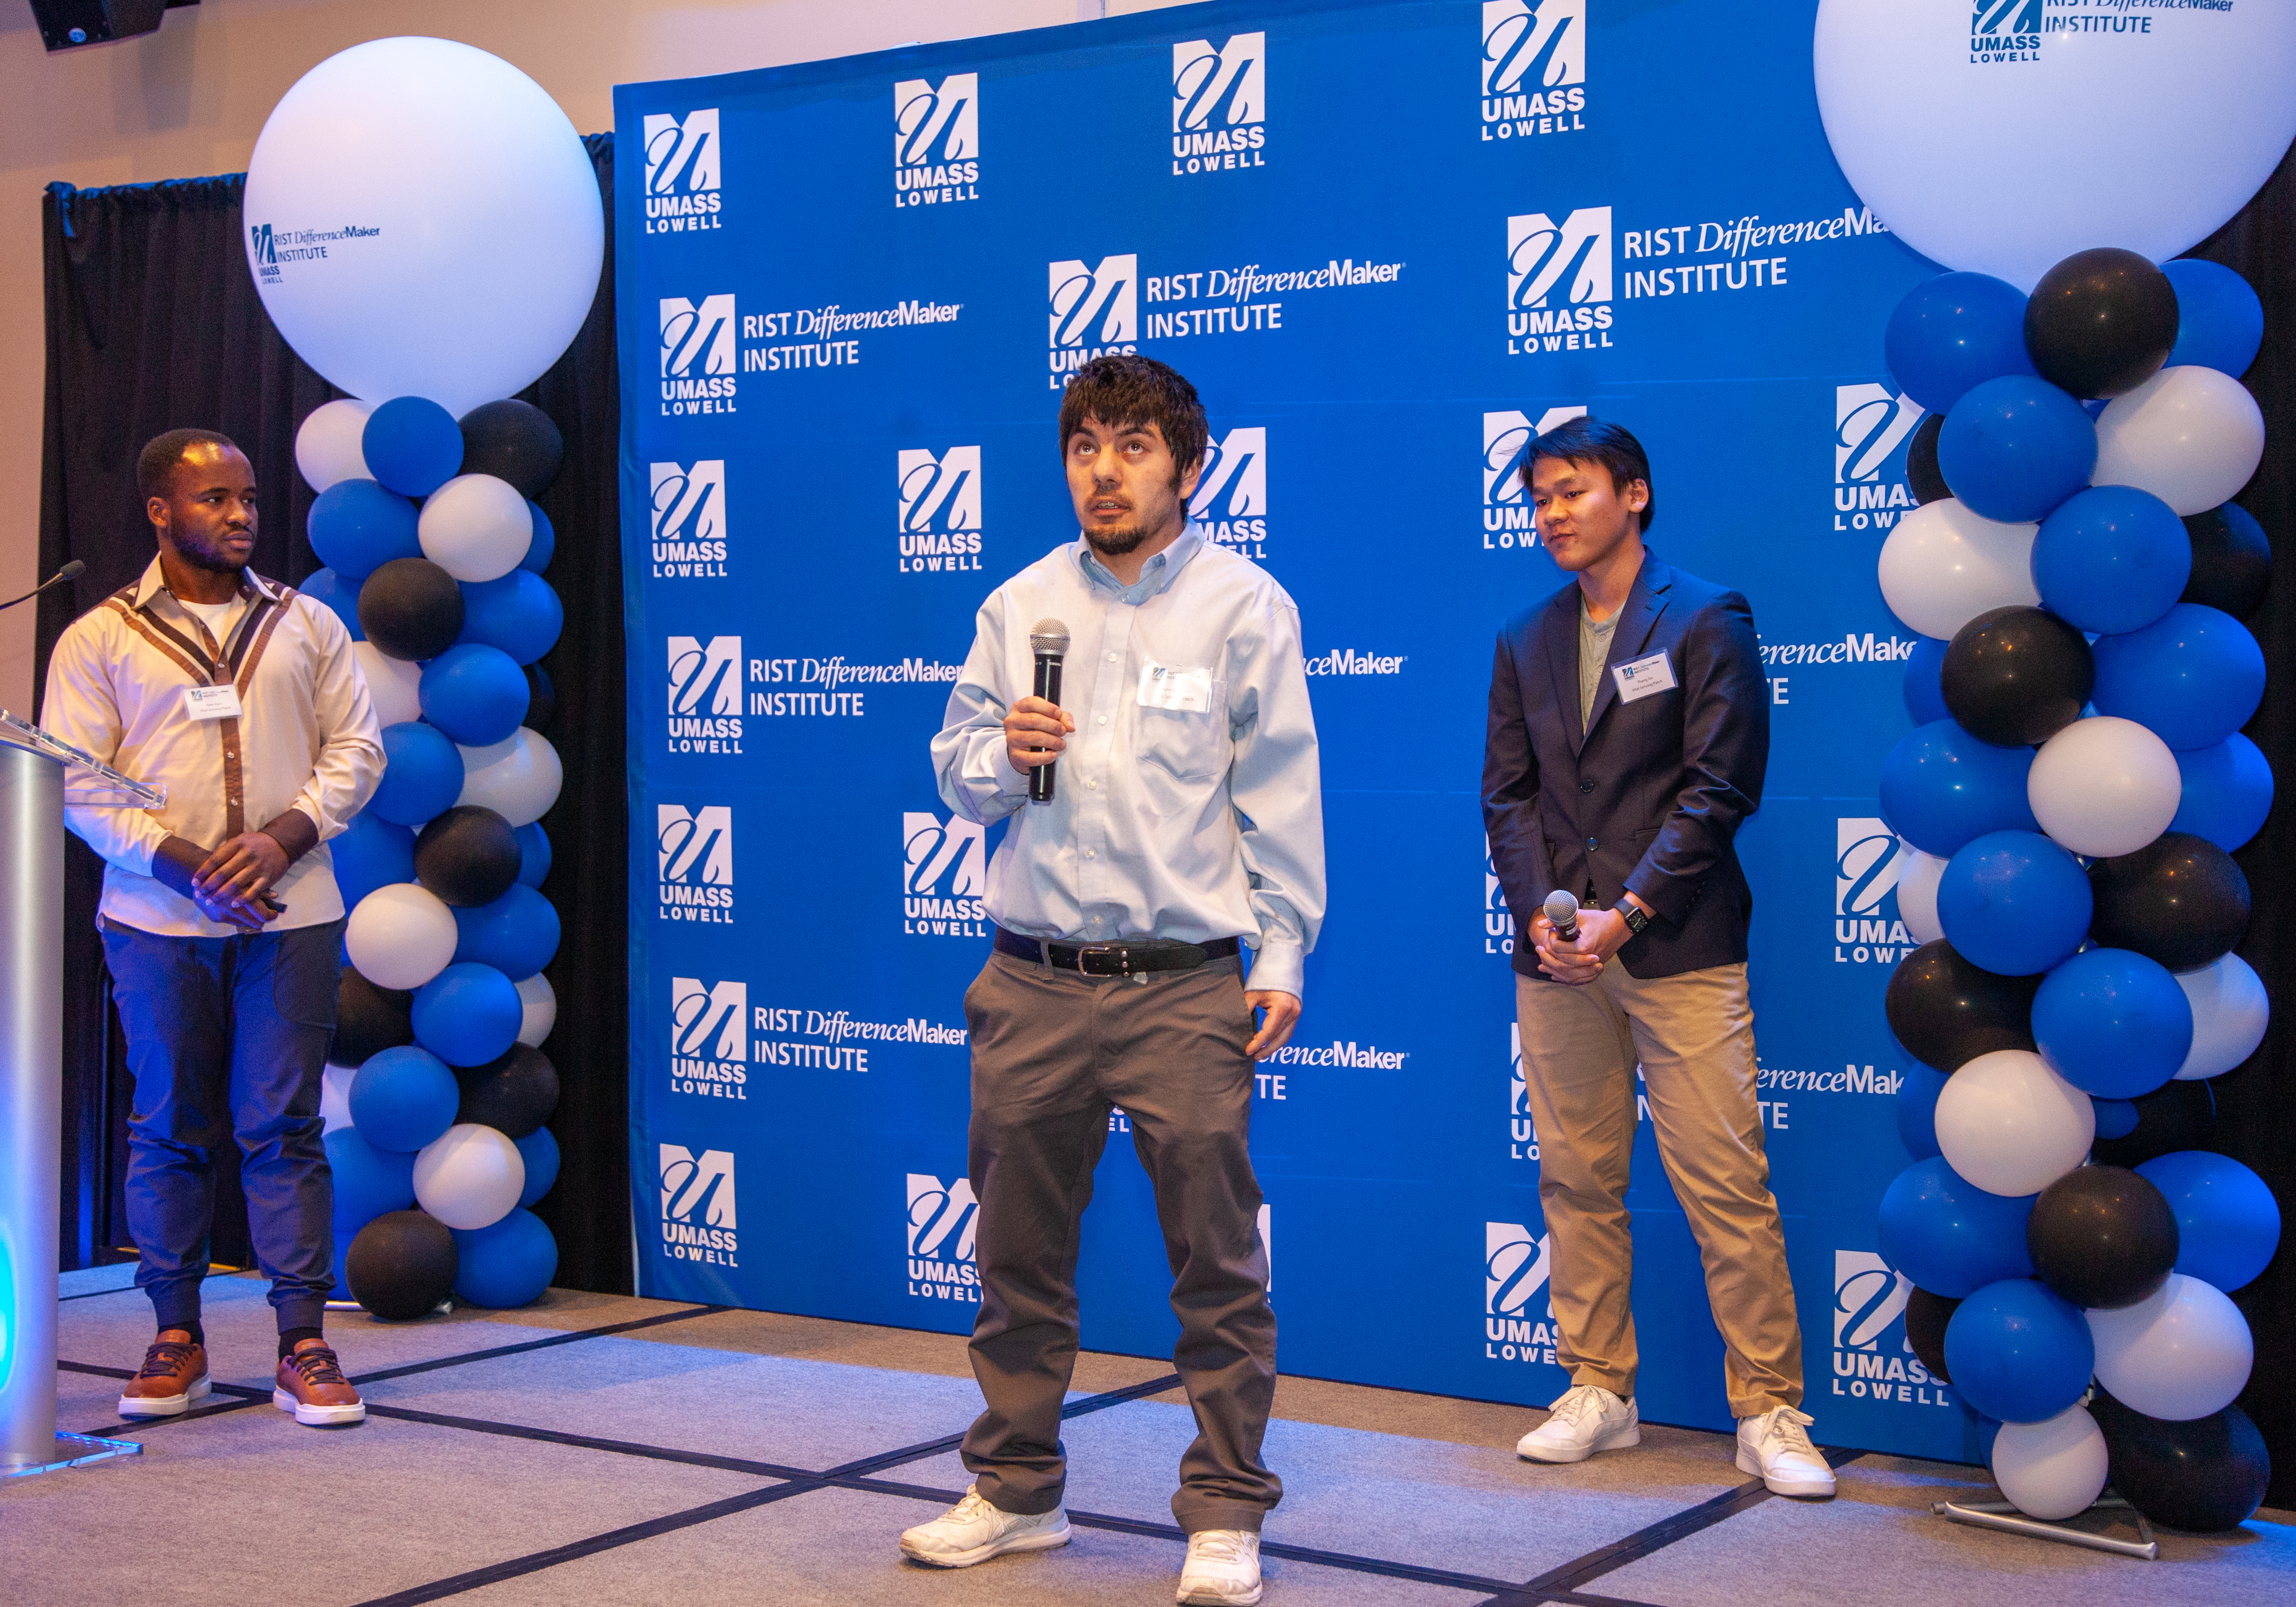 3 male students from the Vital Sensing Patch team speaking and presenting in front of a blue UMass Lowell backdrop and balloons.